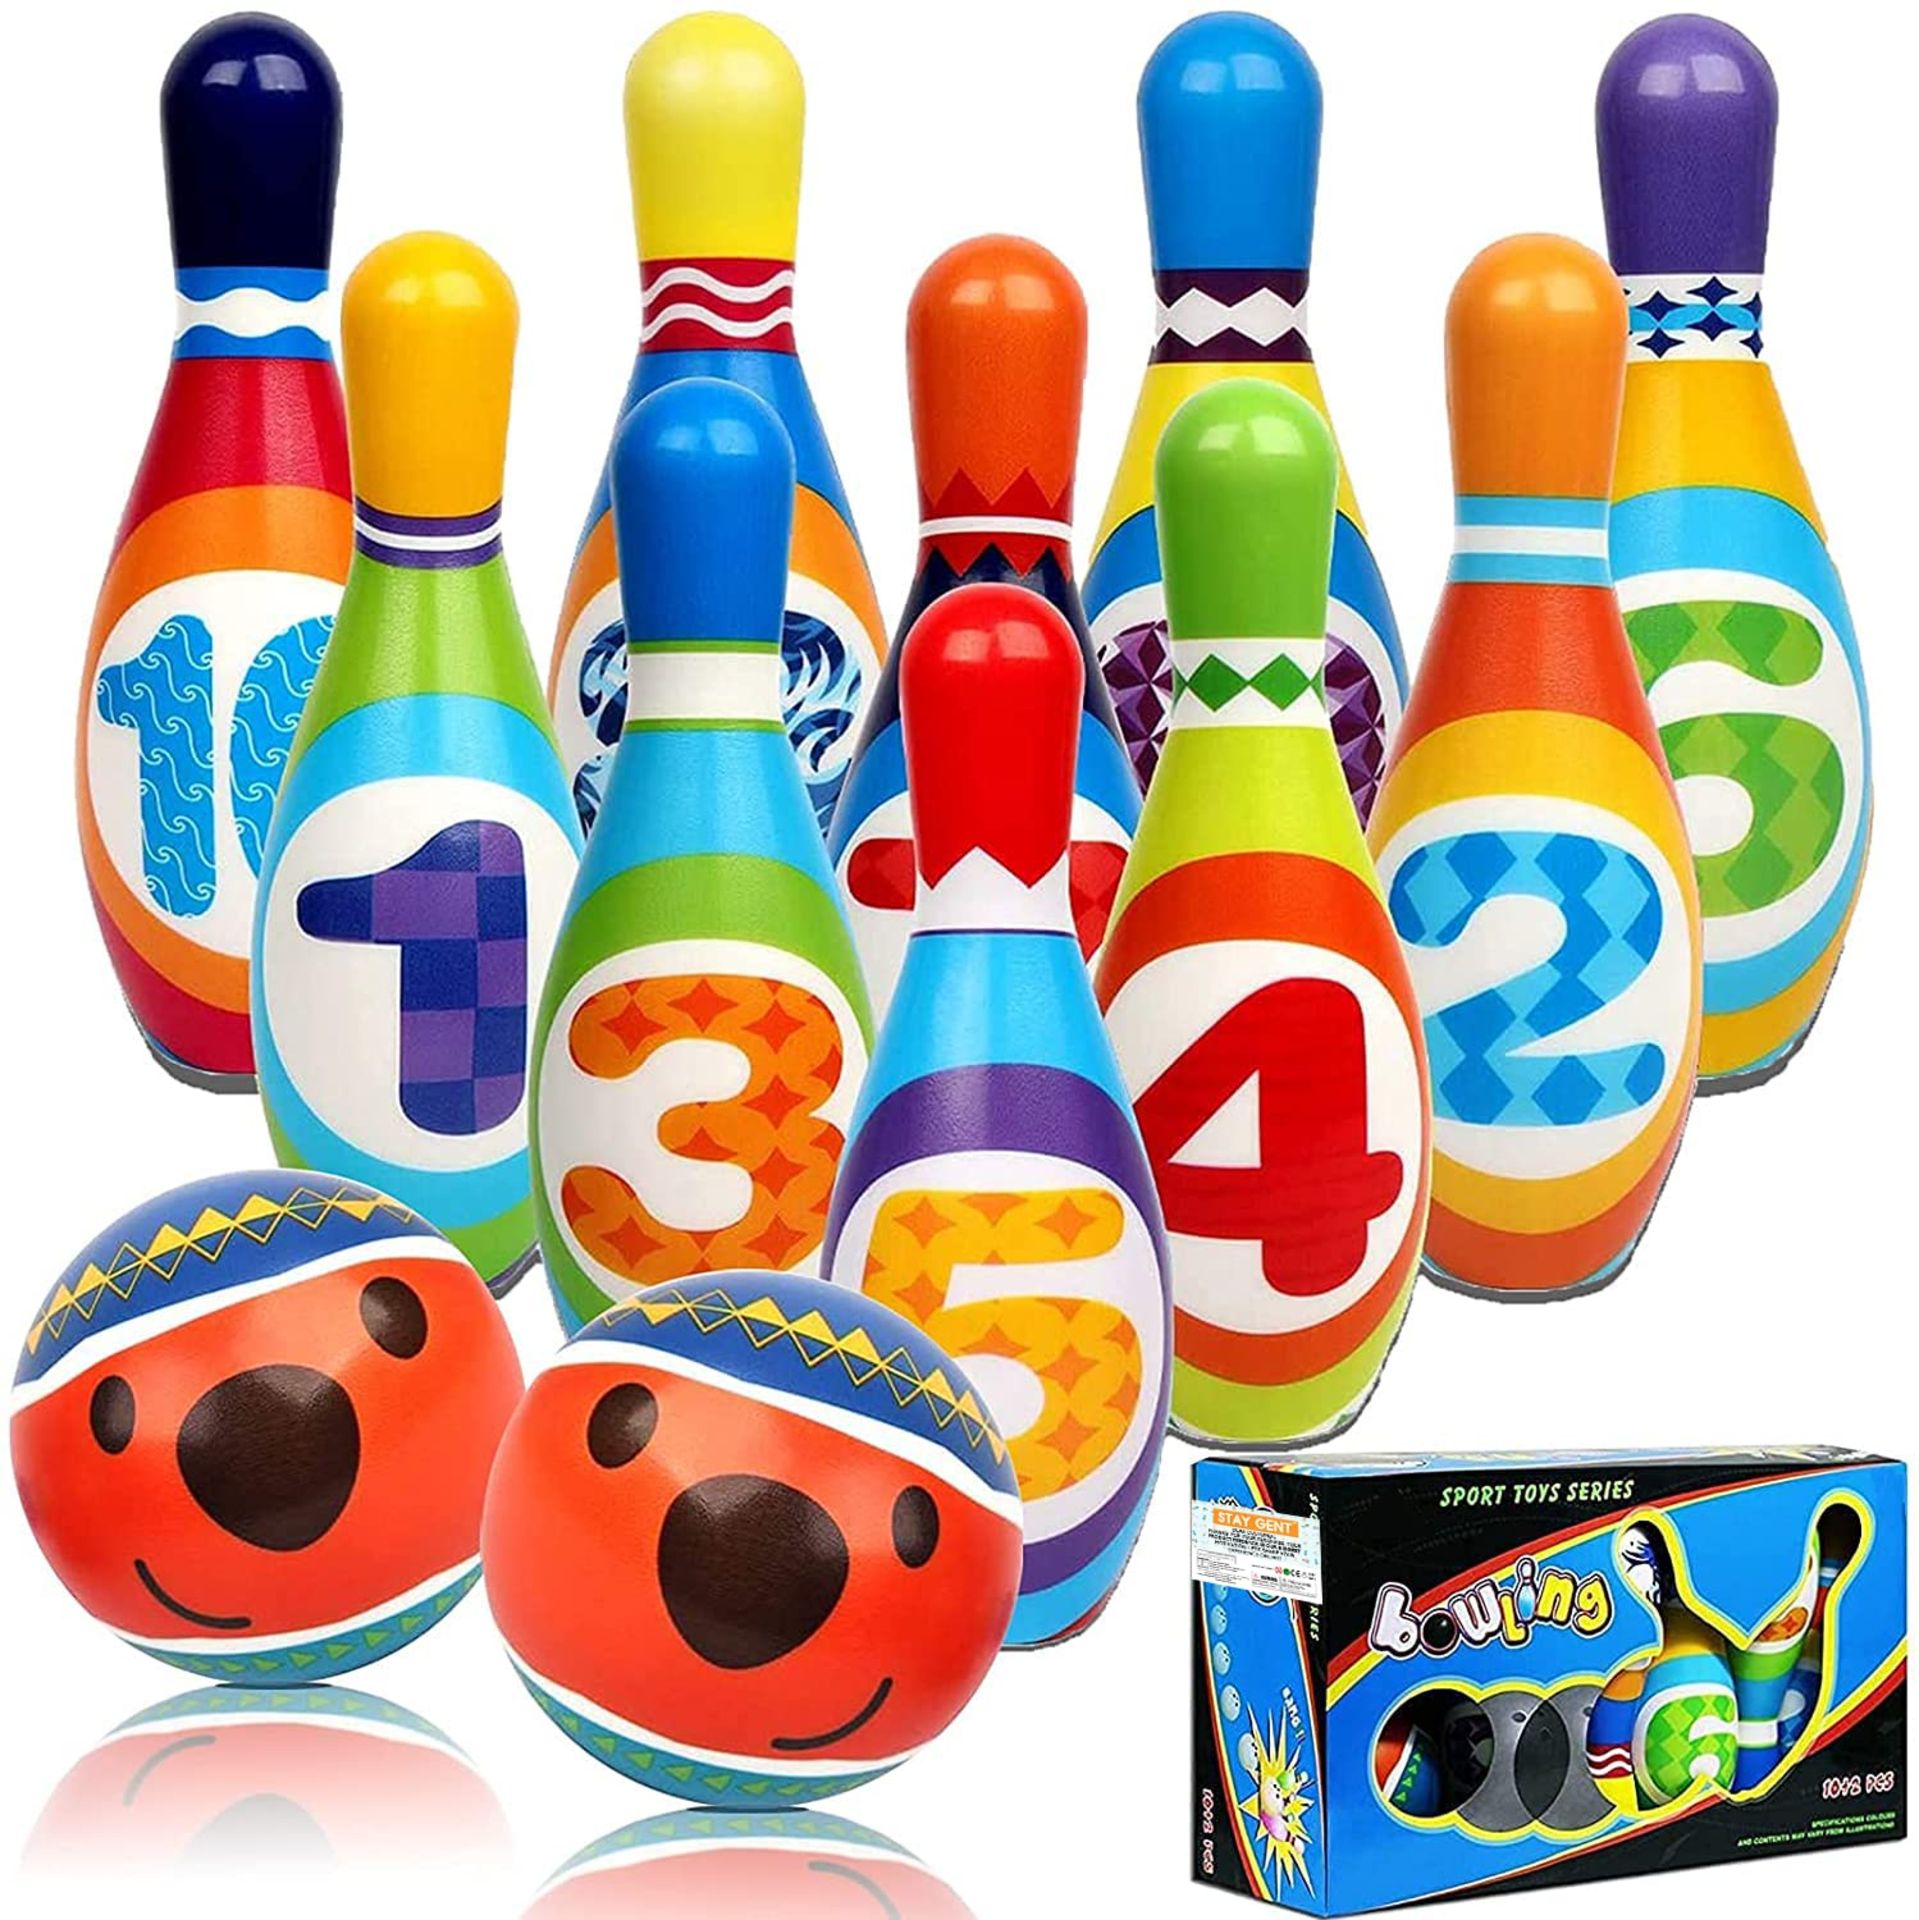 RRP £28.32 STAY GENT Kids Bowling Set Skittles Game 10 Pins and